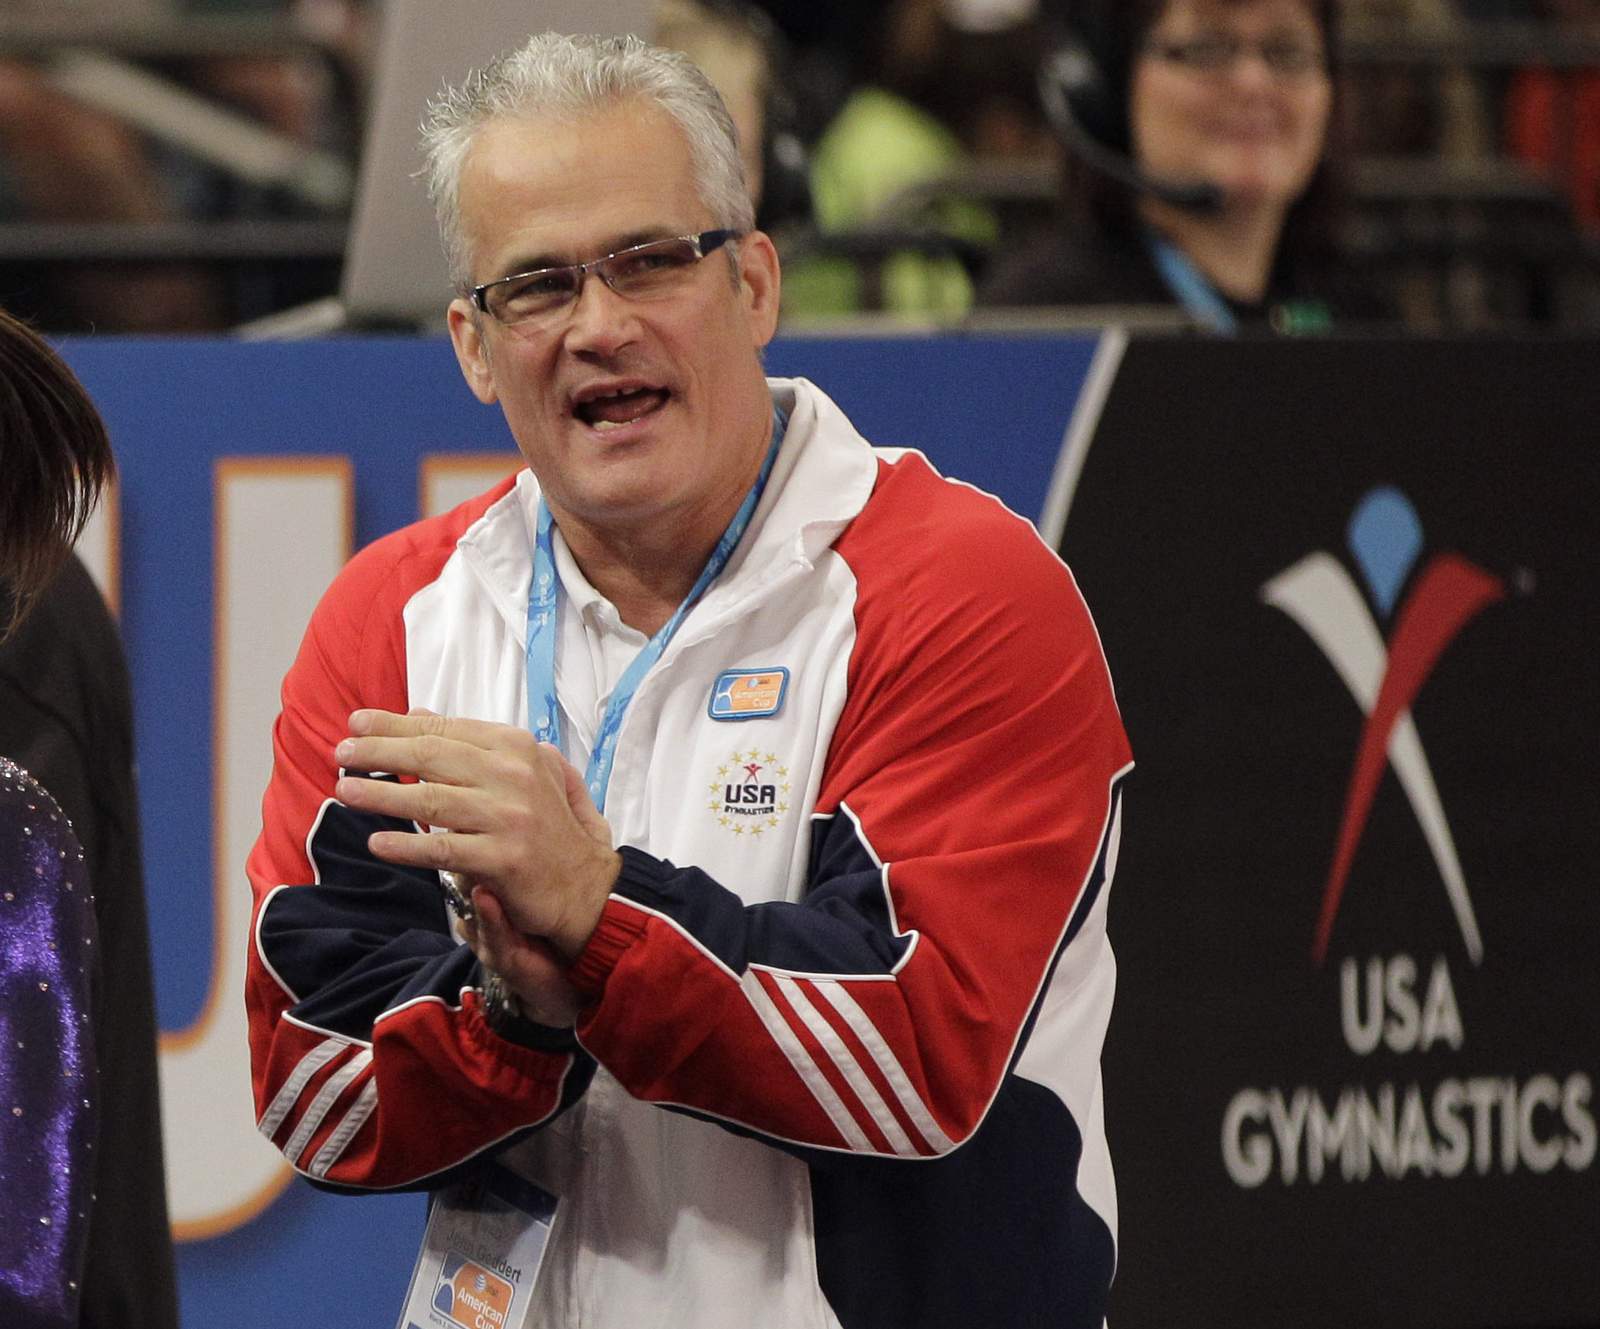 Olympics gymnastics coach kills himself after being charged